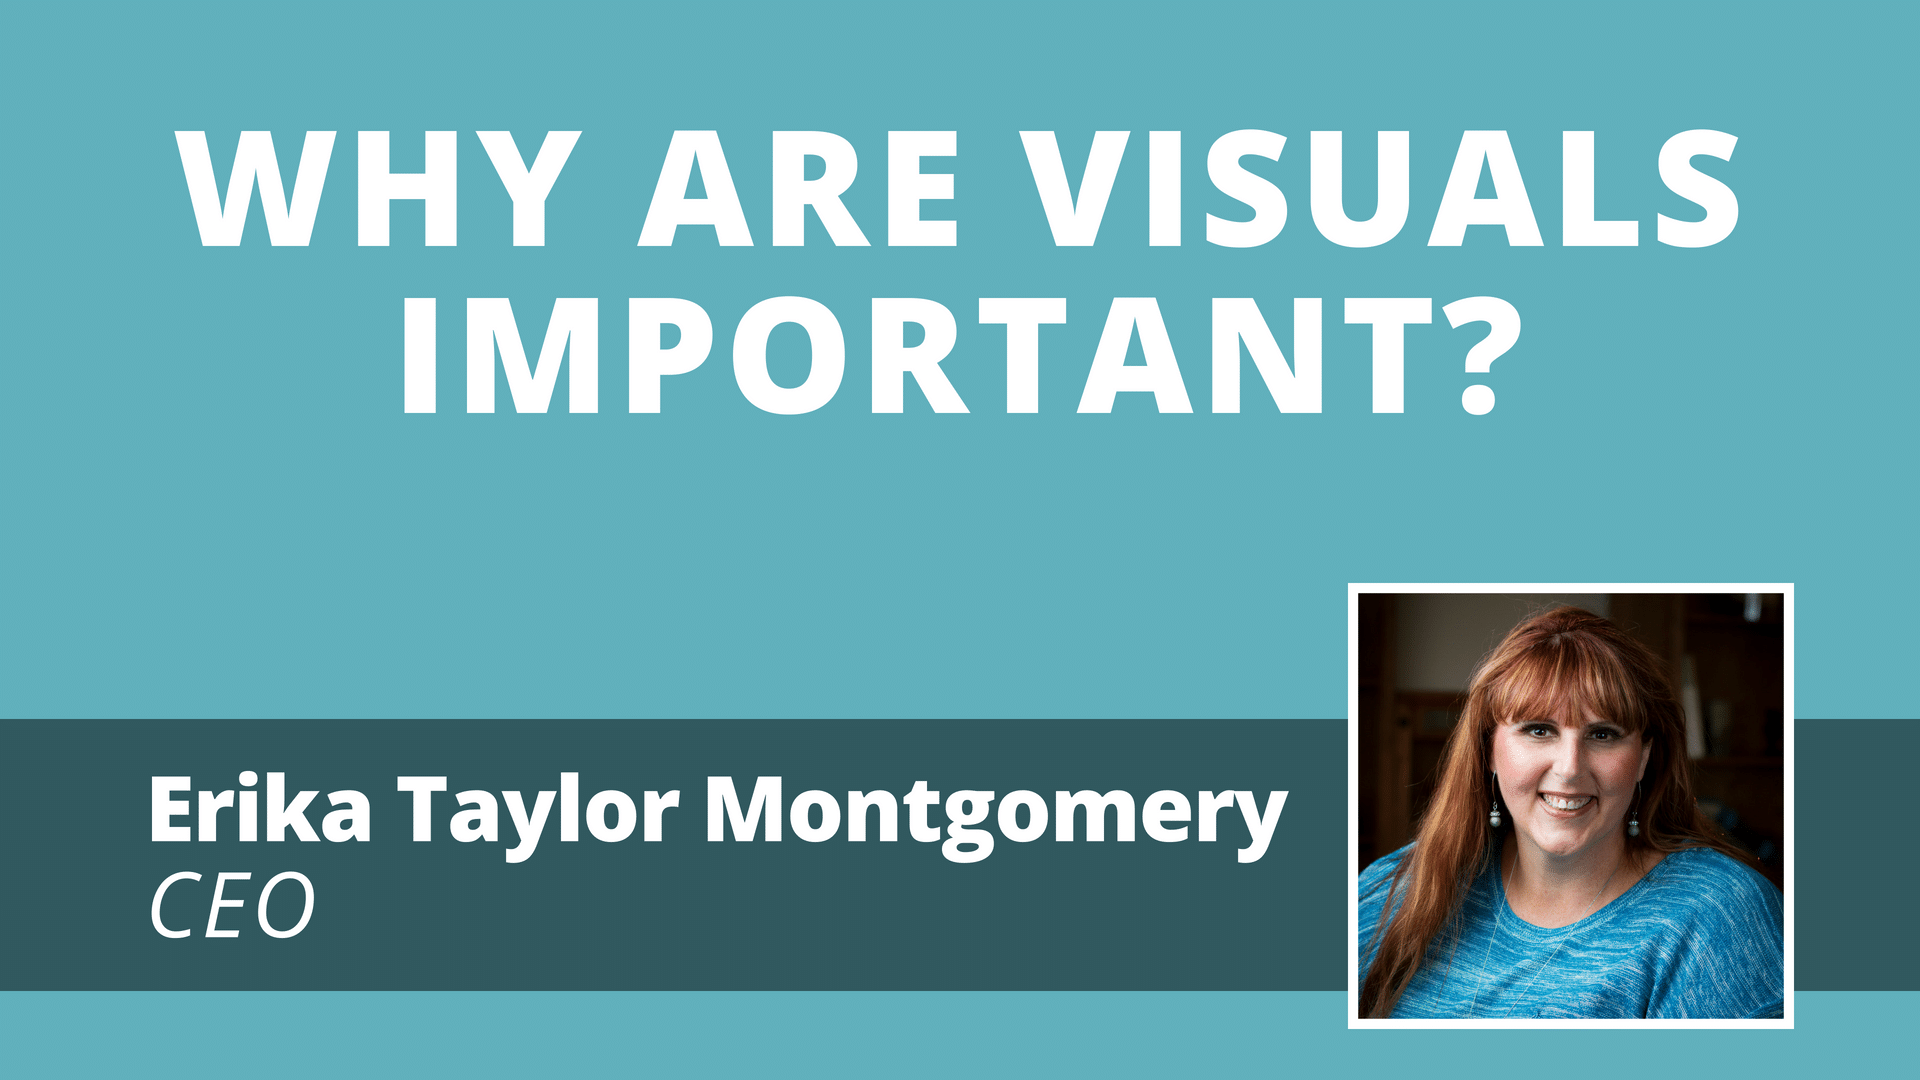 Video: Why Are Visuals Important?